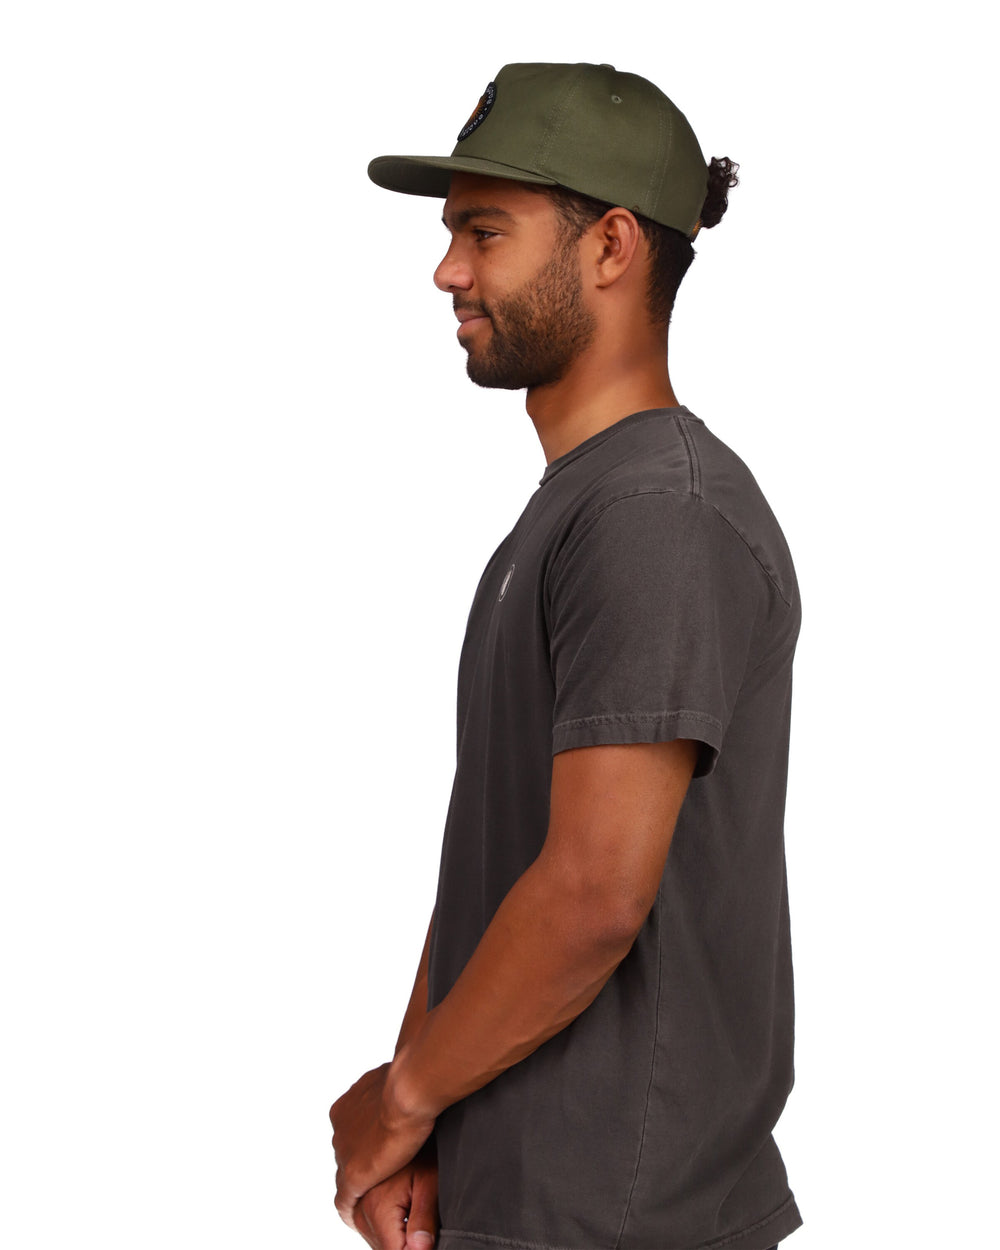 Solis Hat - Army Green